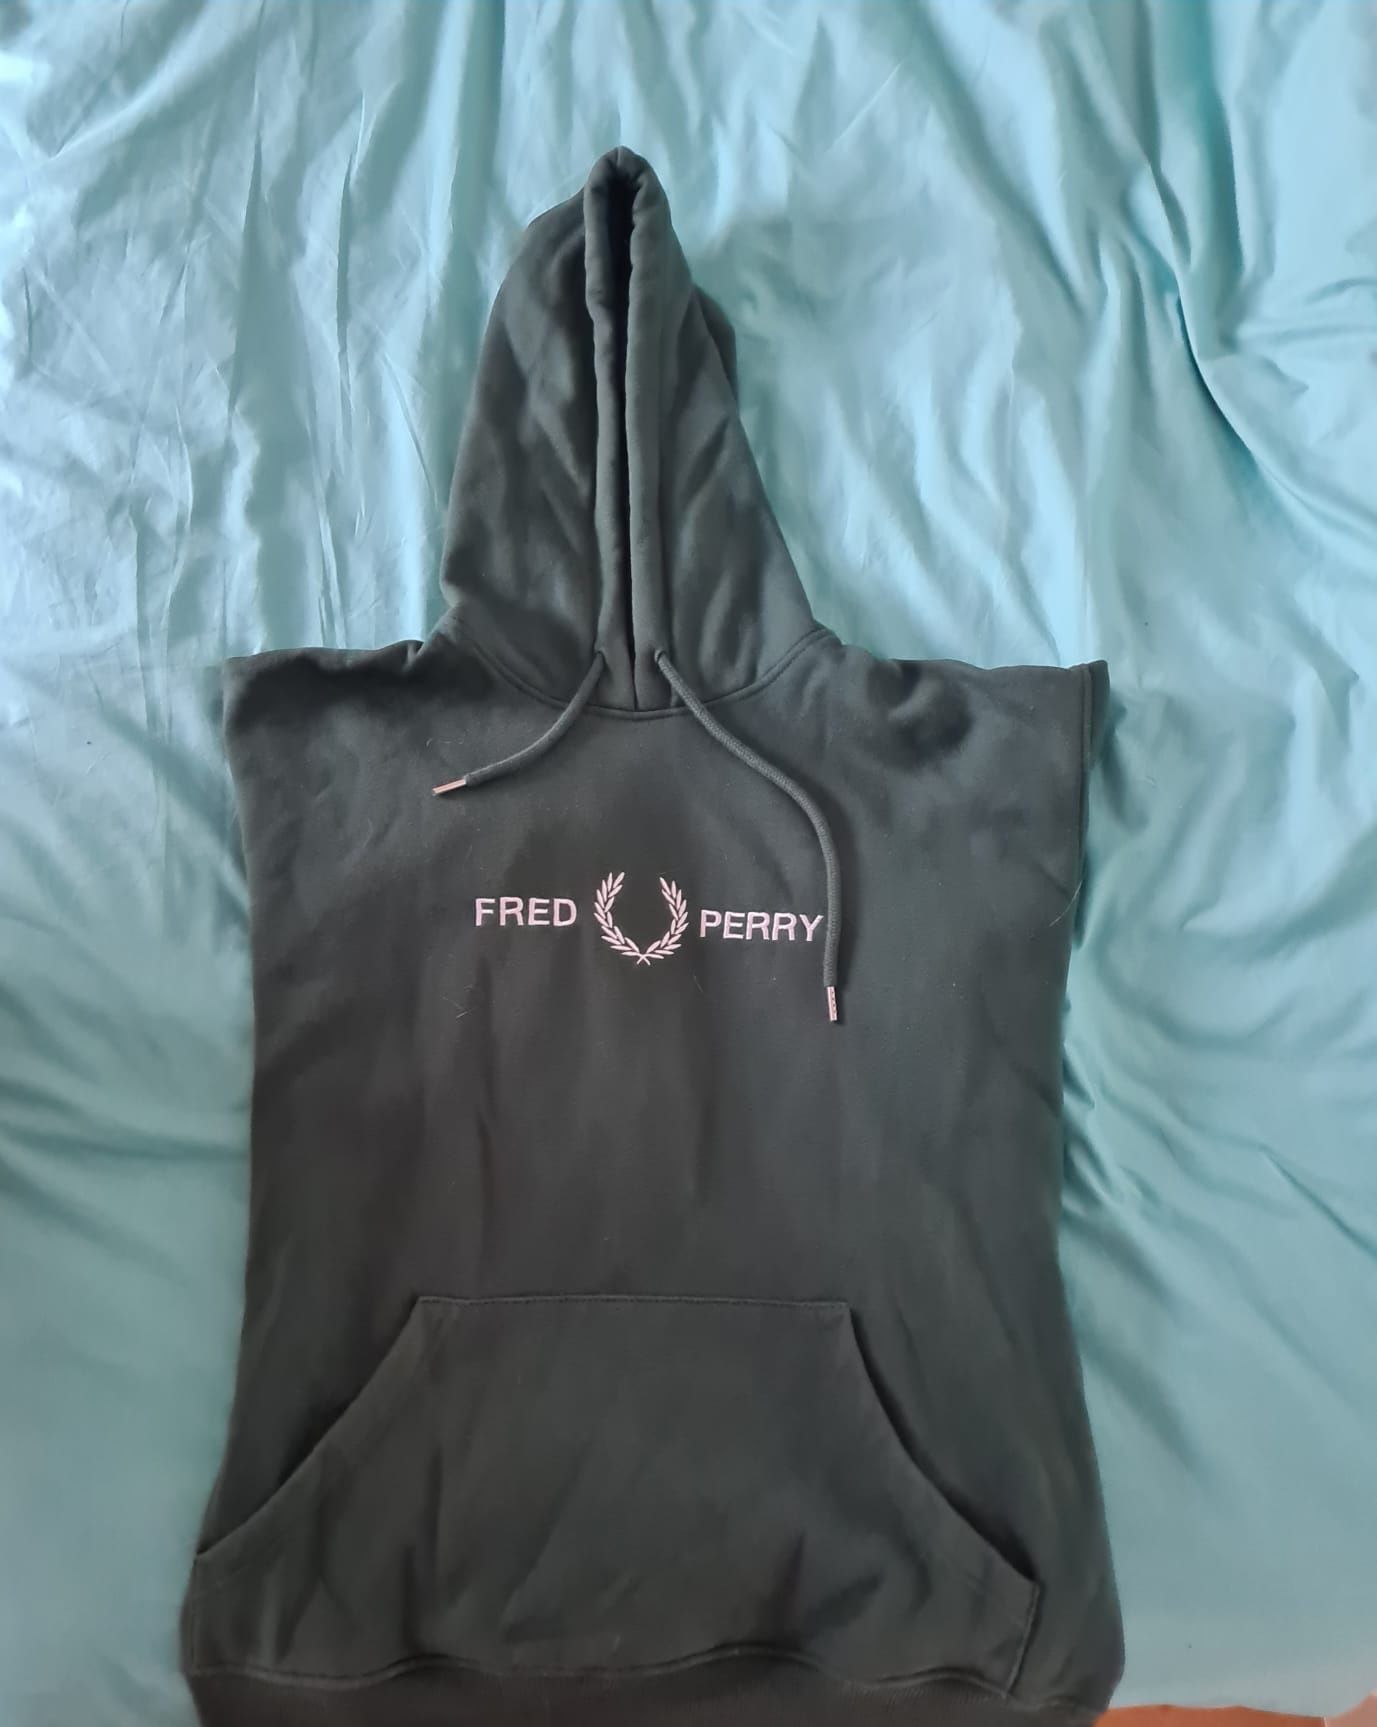 Sweat FRED PERRY Tamanho XL